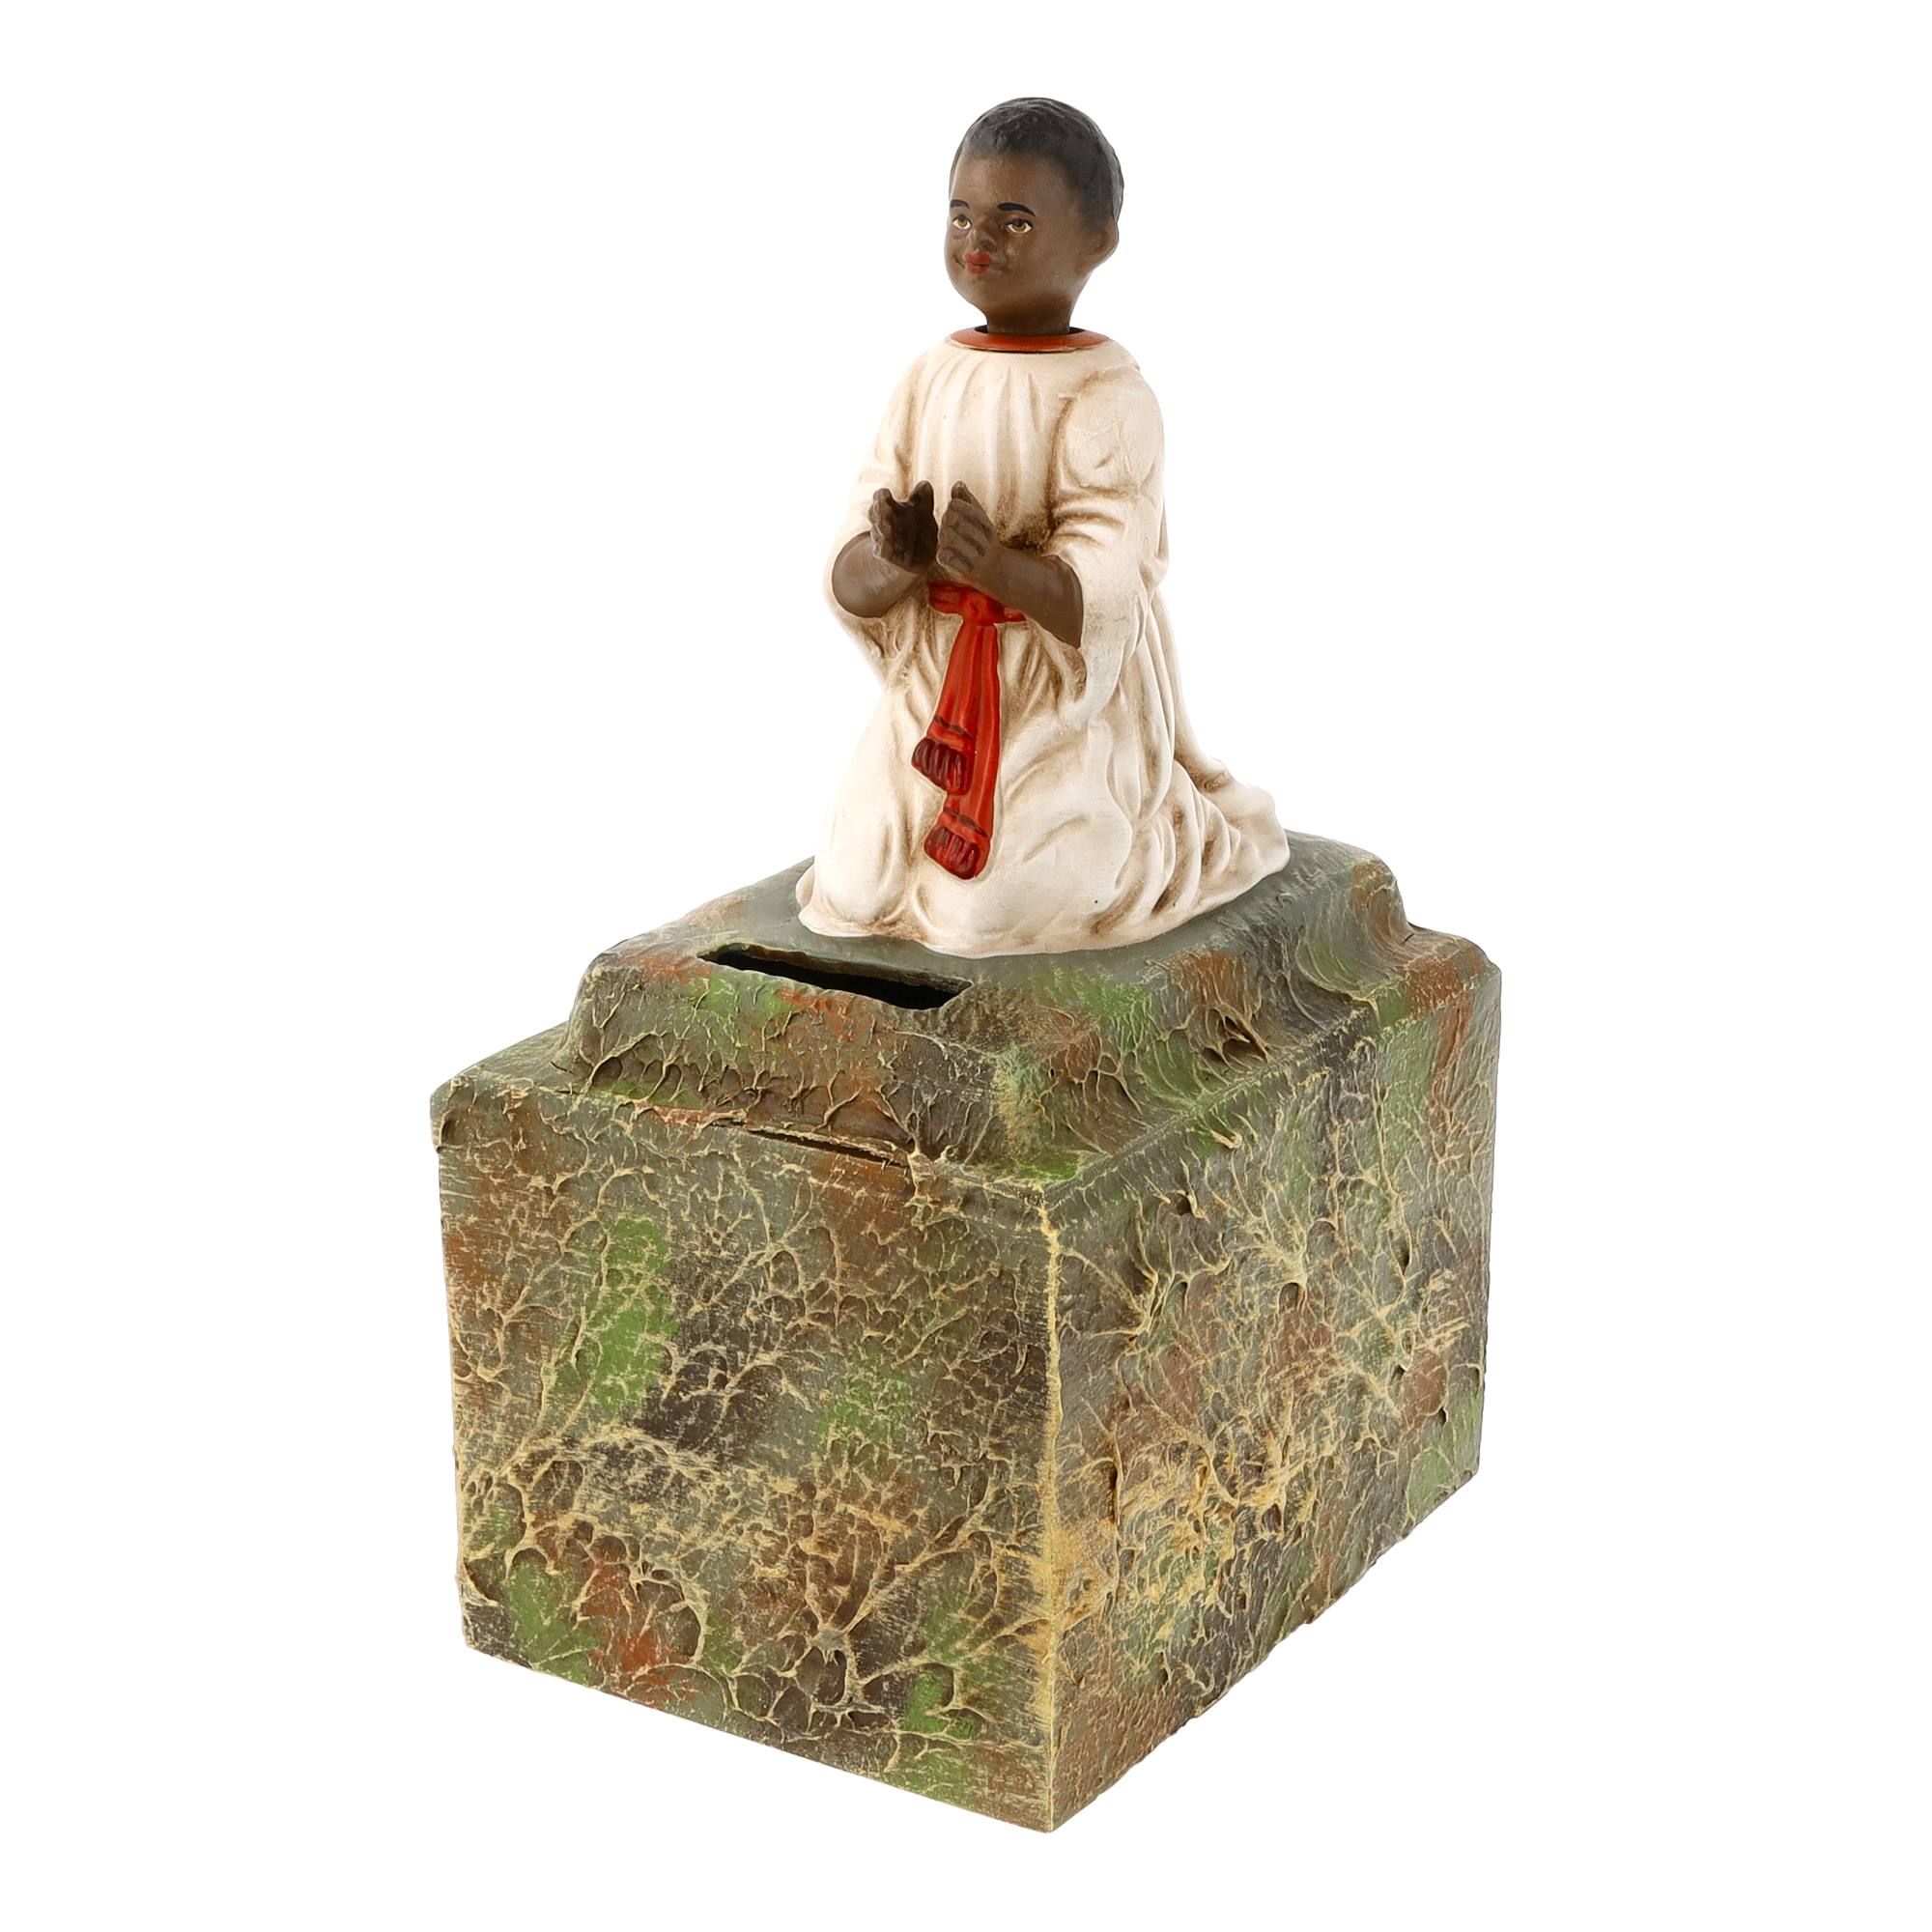 Mission Donation Box Africa antique white